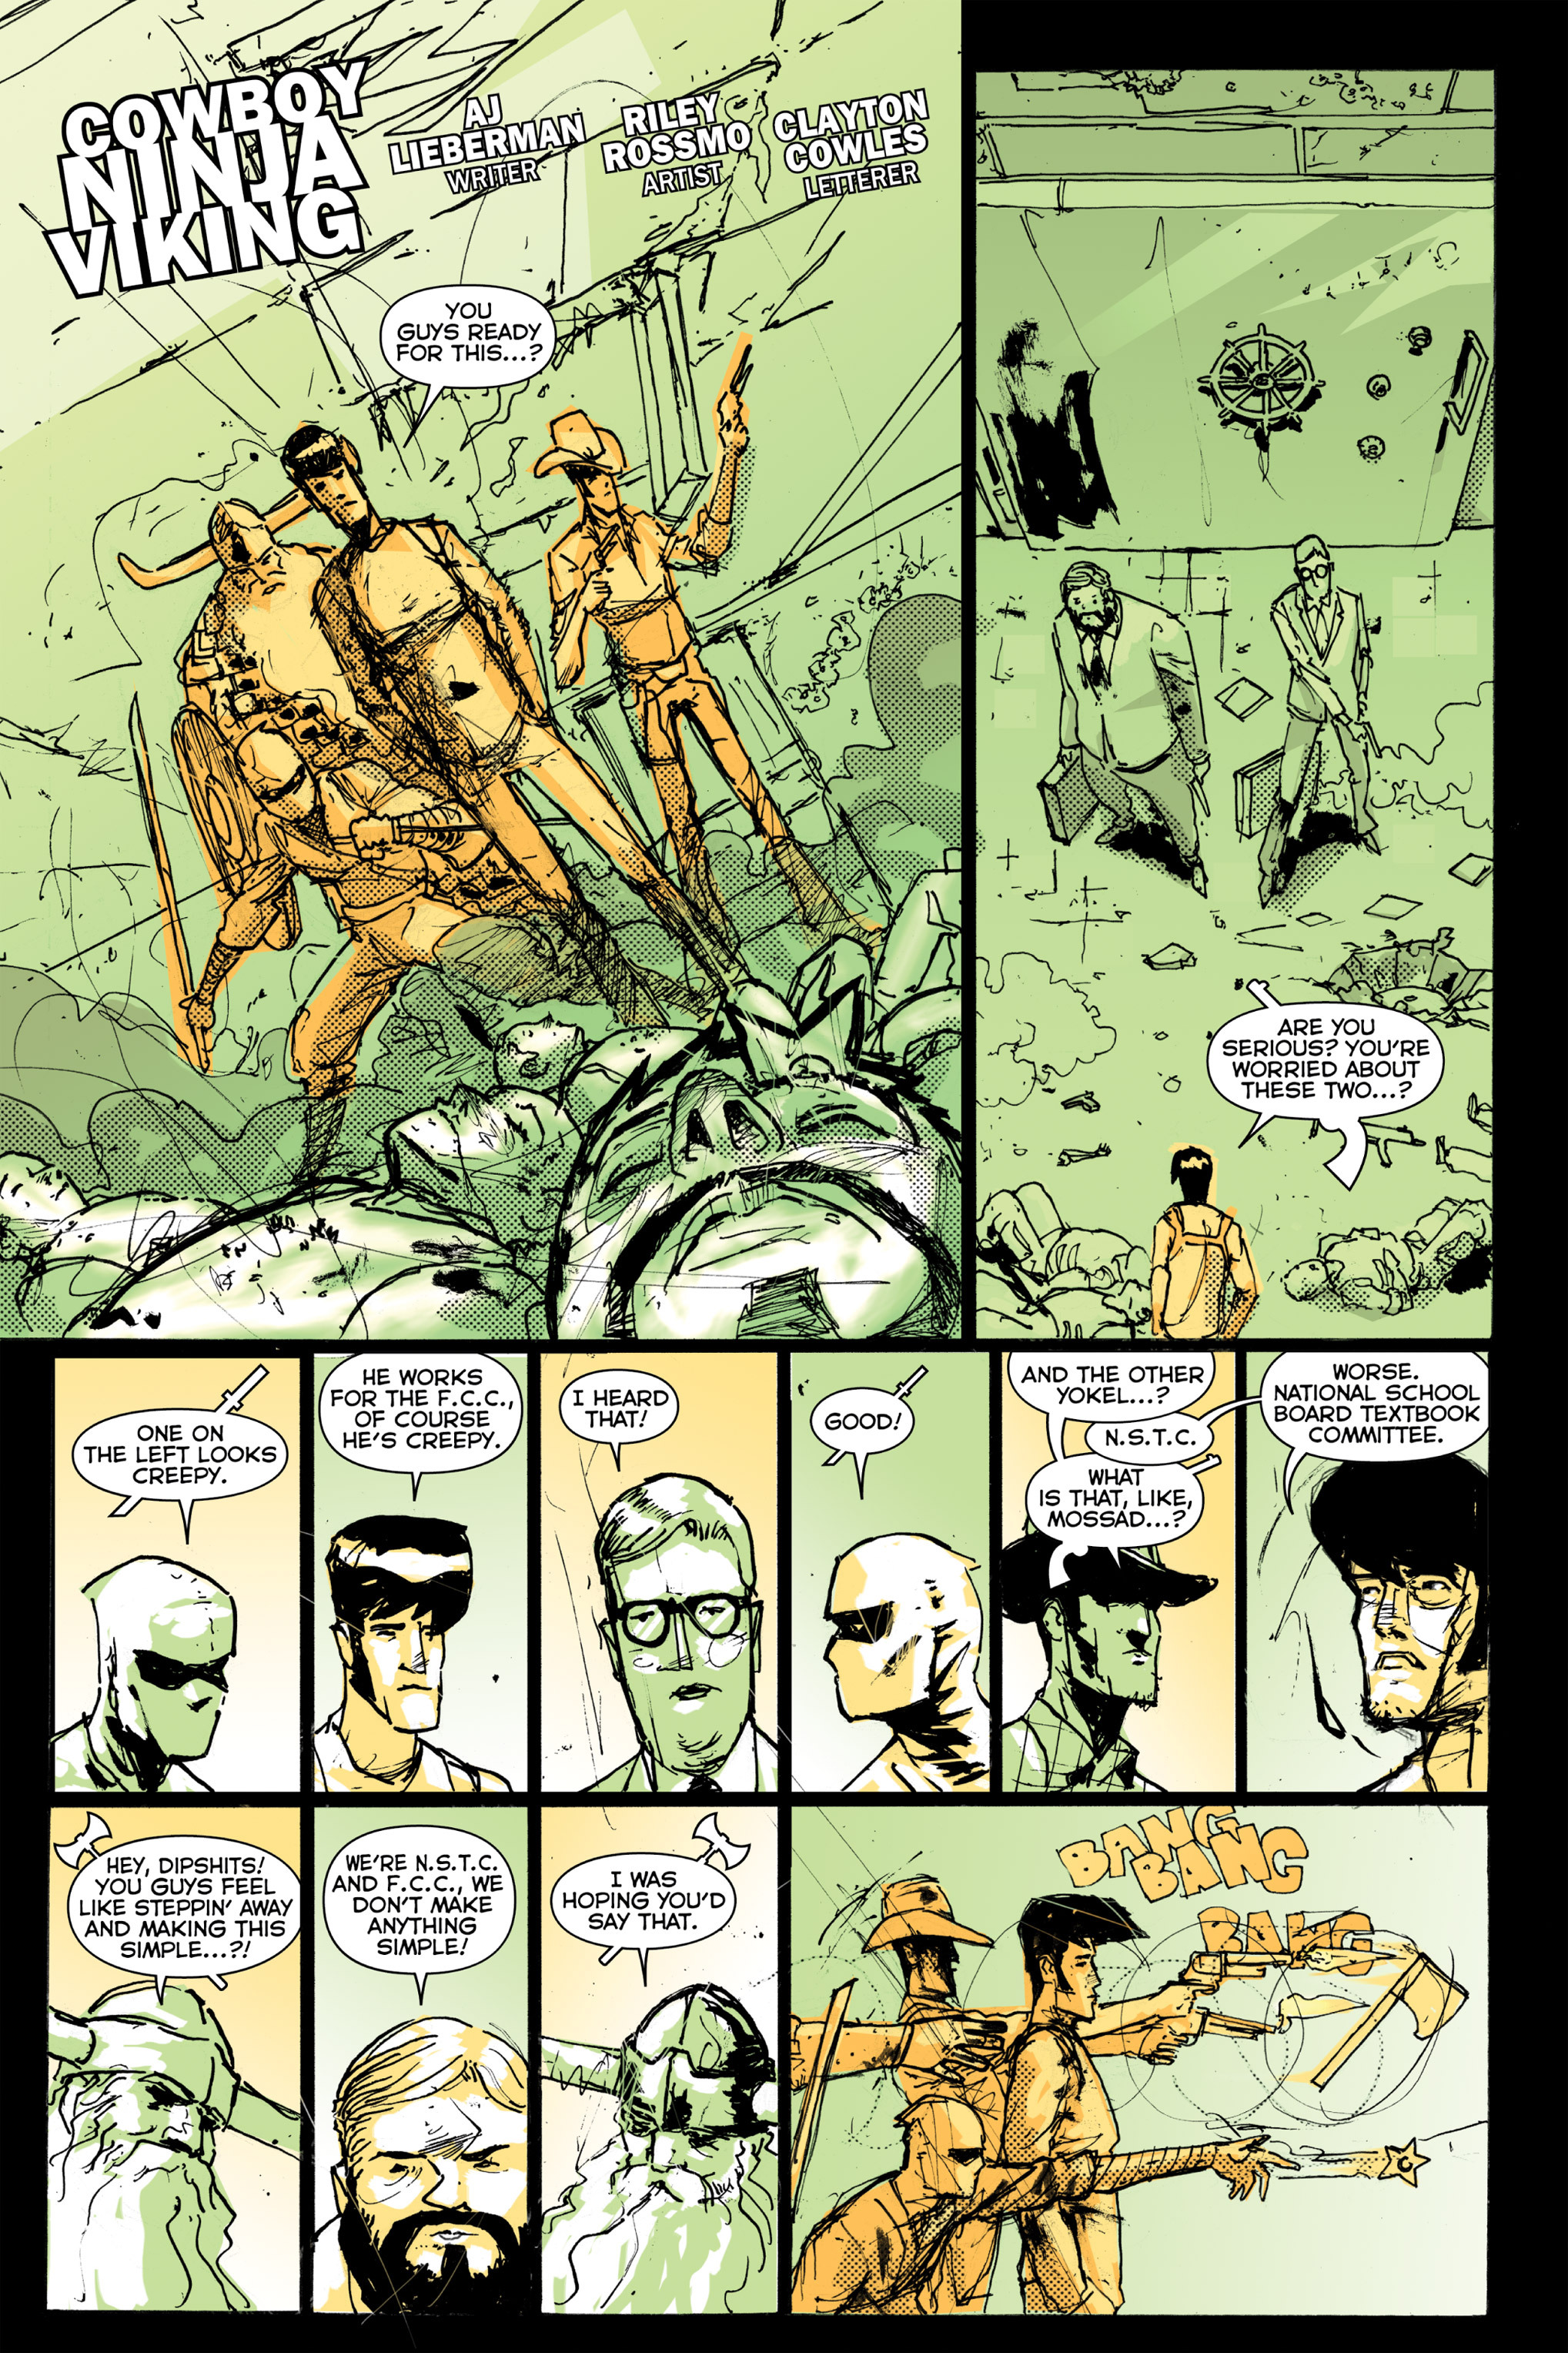 Read online Cowboy Ninja Viking Deluxe Edition comic -  Issue # TPB - 273